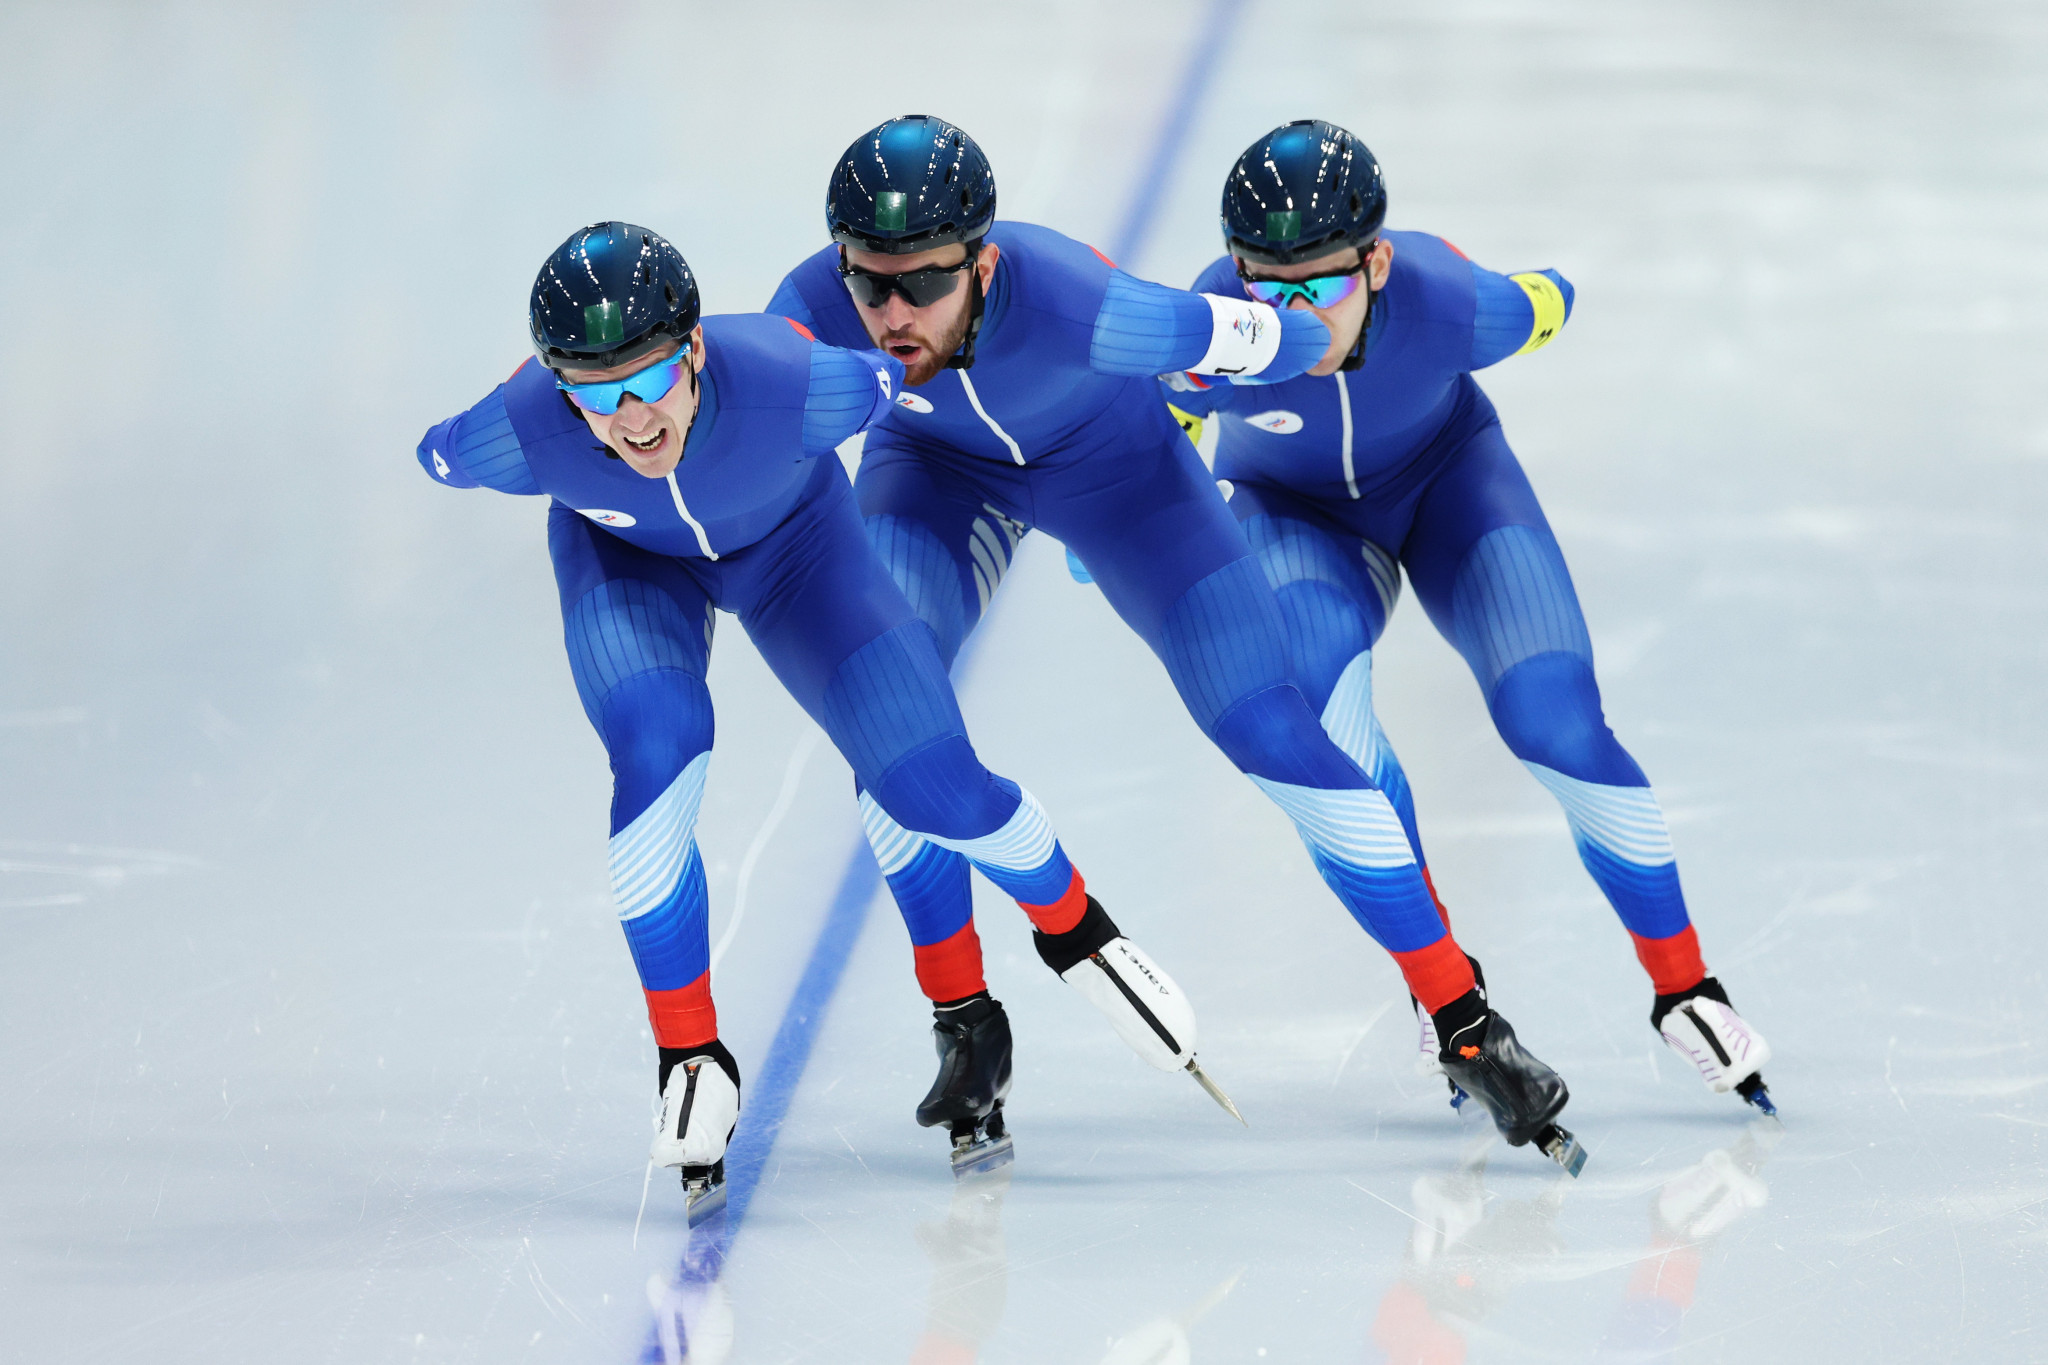 The Russian Olympic Committee team won silver in the men's team pursuit at the Beijing 2022 Winter Olympics, setting an Olympic record in the semi-final in the process ©Getty Images